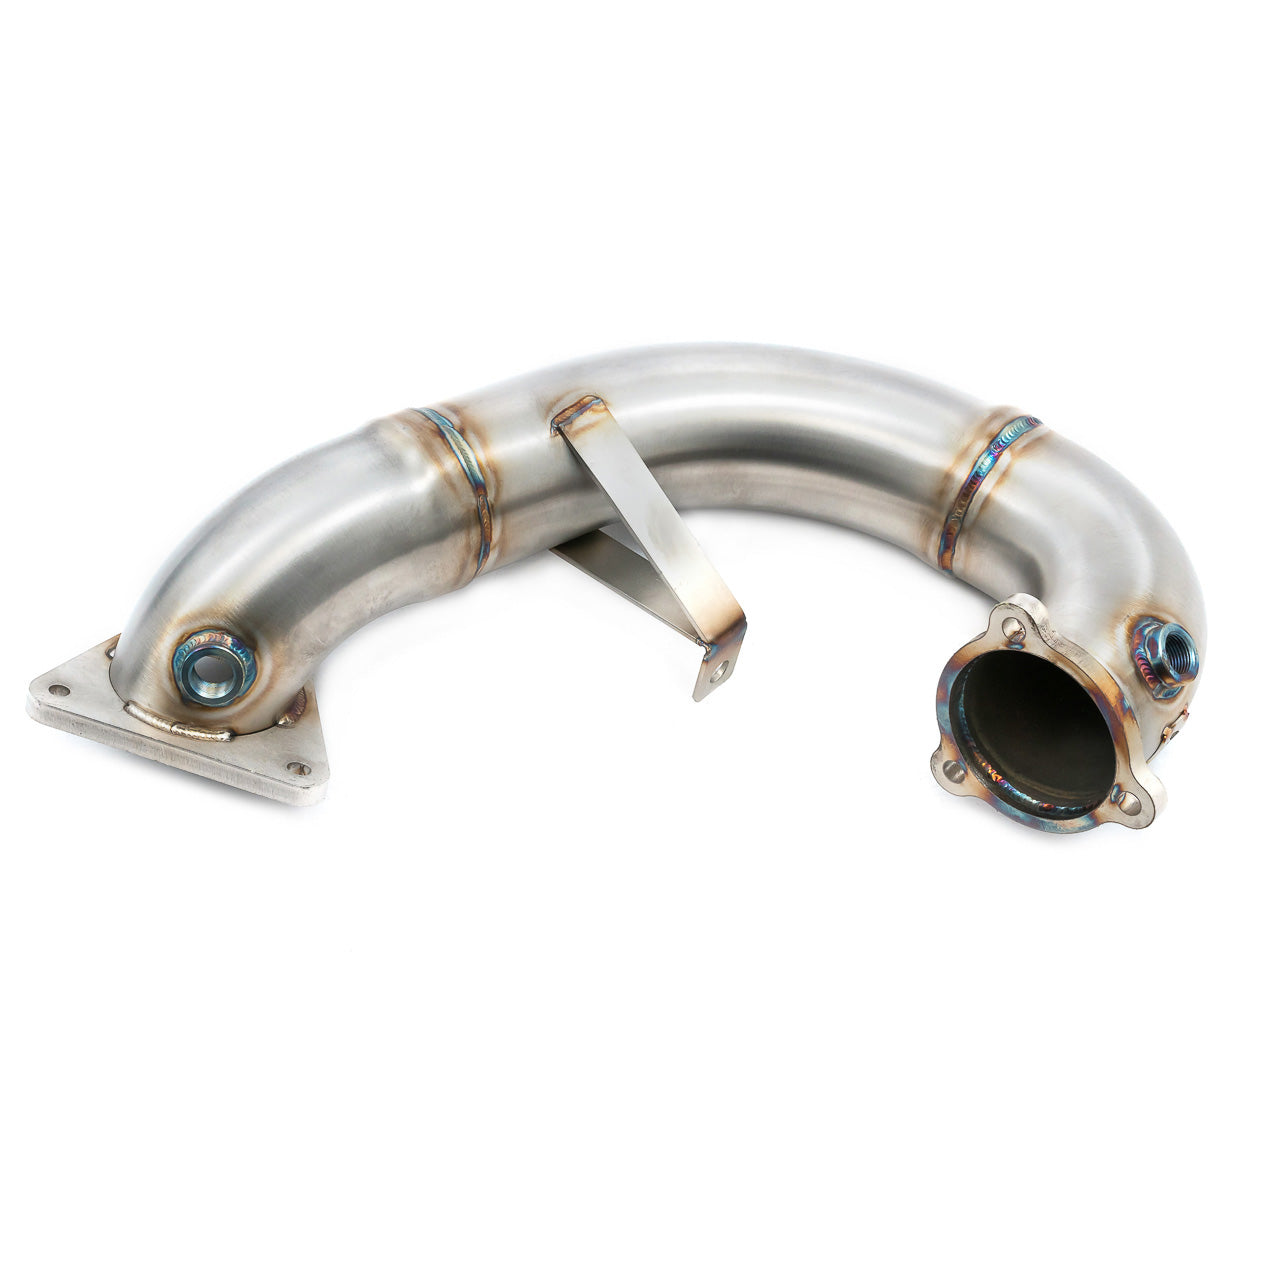 Cobra Sports Cat / Decat Front Downpipe Performance Exhaust - Renault Megane RS 275 Mk3 (14-17)